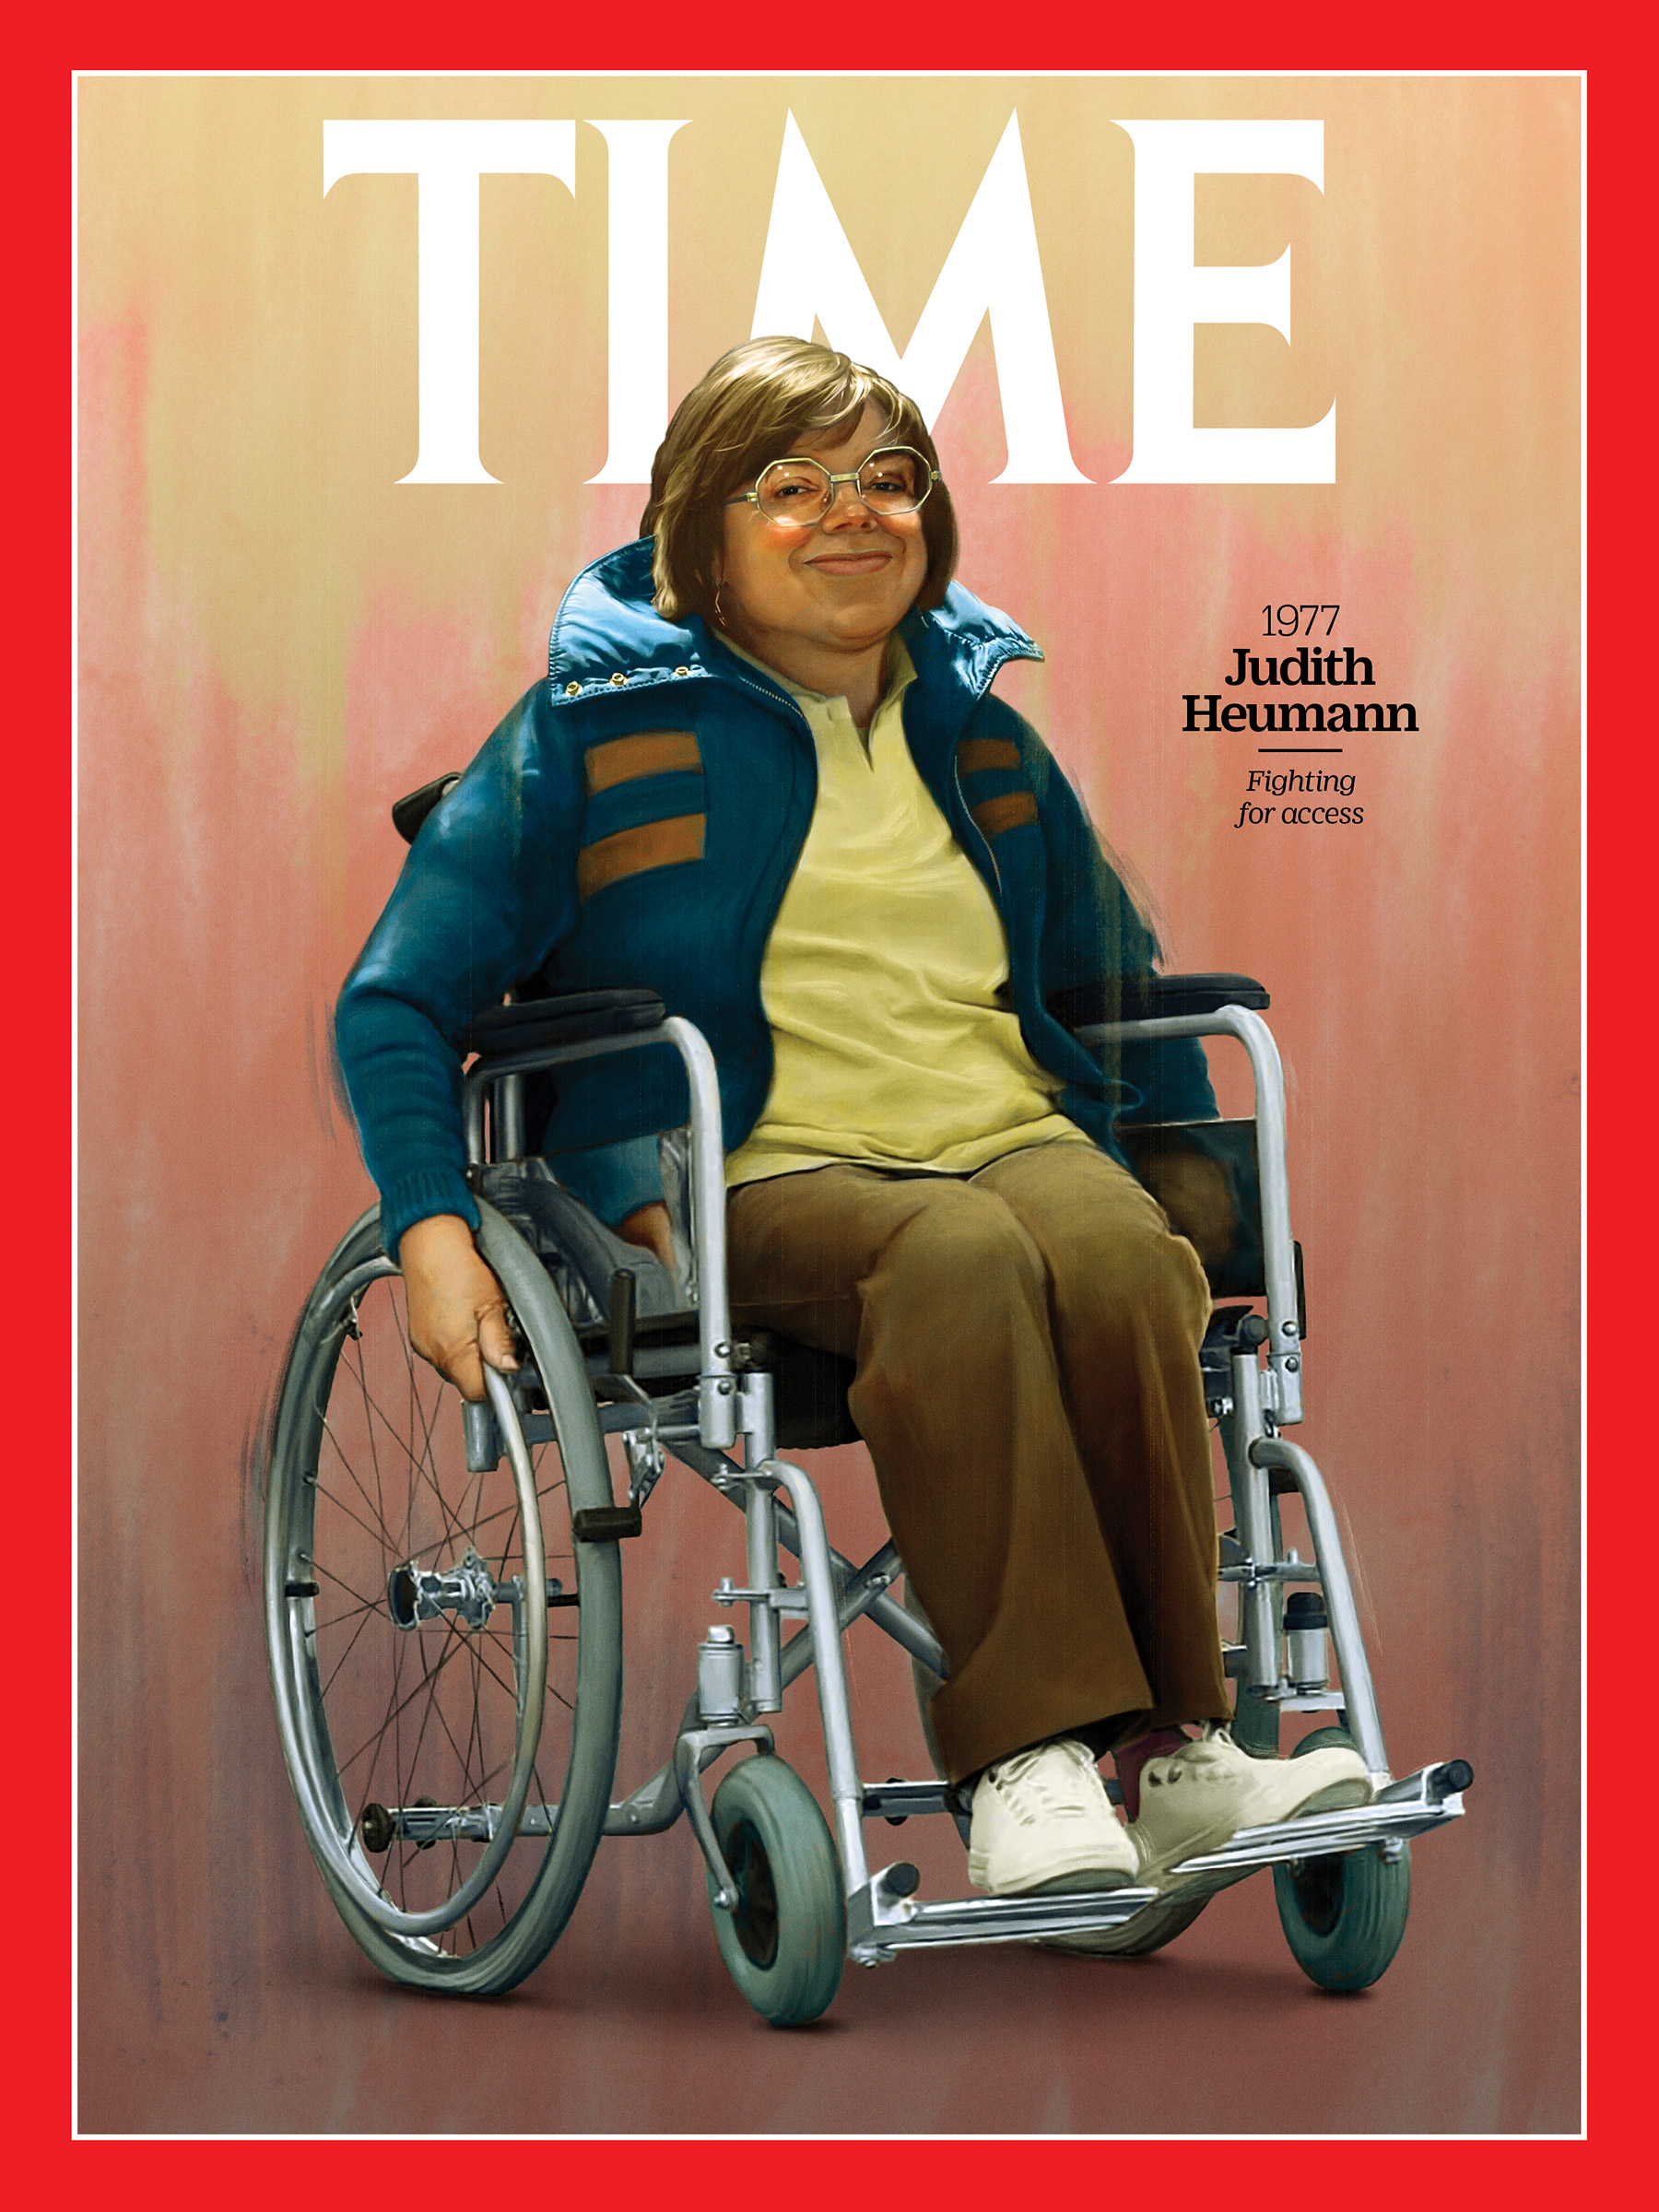 <a href="https://fineartamerica.com/featured/judith-heumann-1977-time.html"><strong>Buy the cover art→</strong></a> (Illustration by Jason Seiler for TIME; HolLynn D'Lil/Becoming Real in 24 Days)